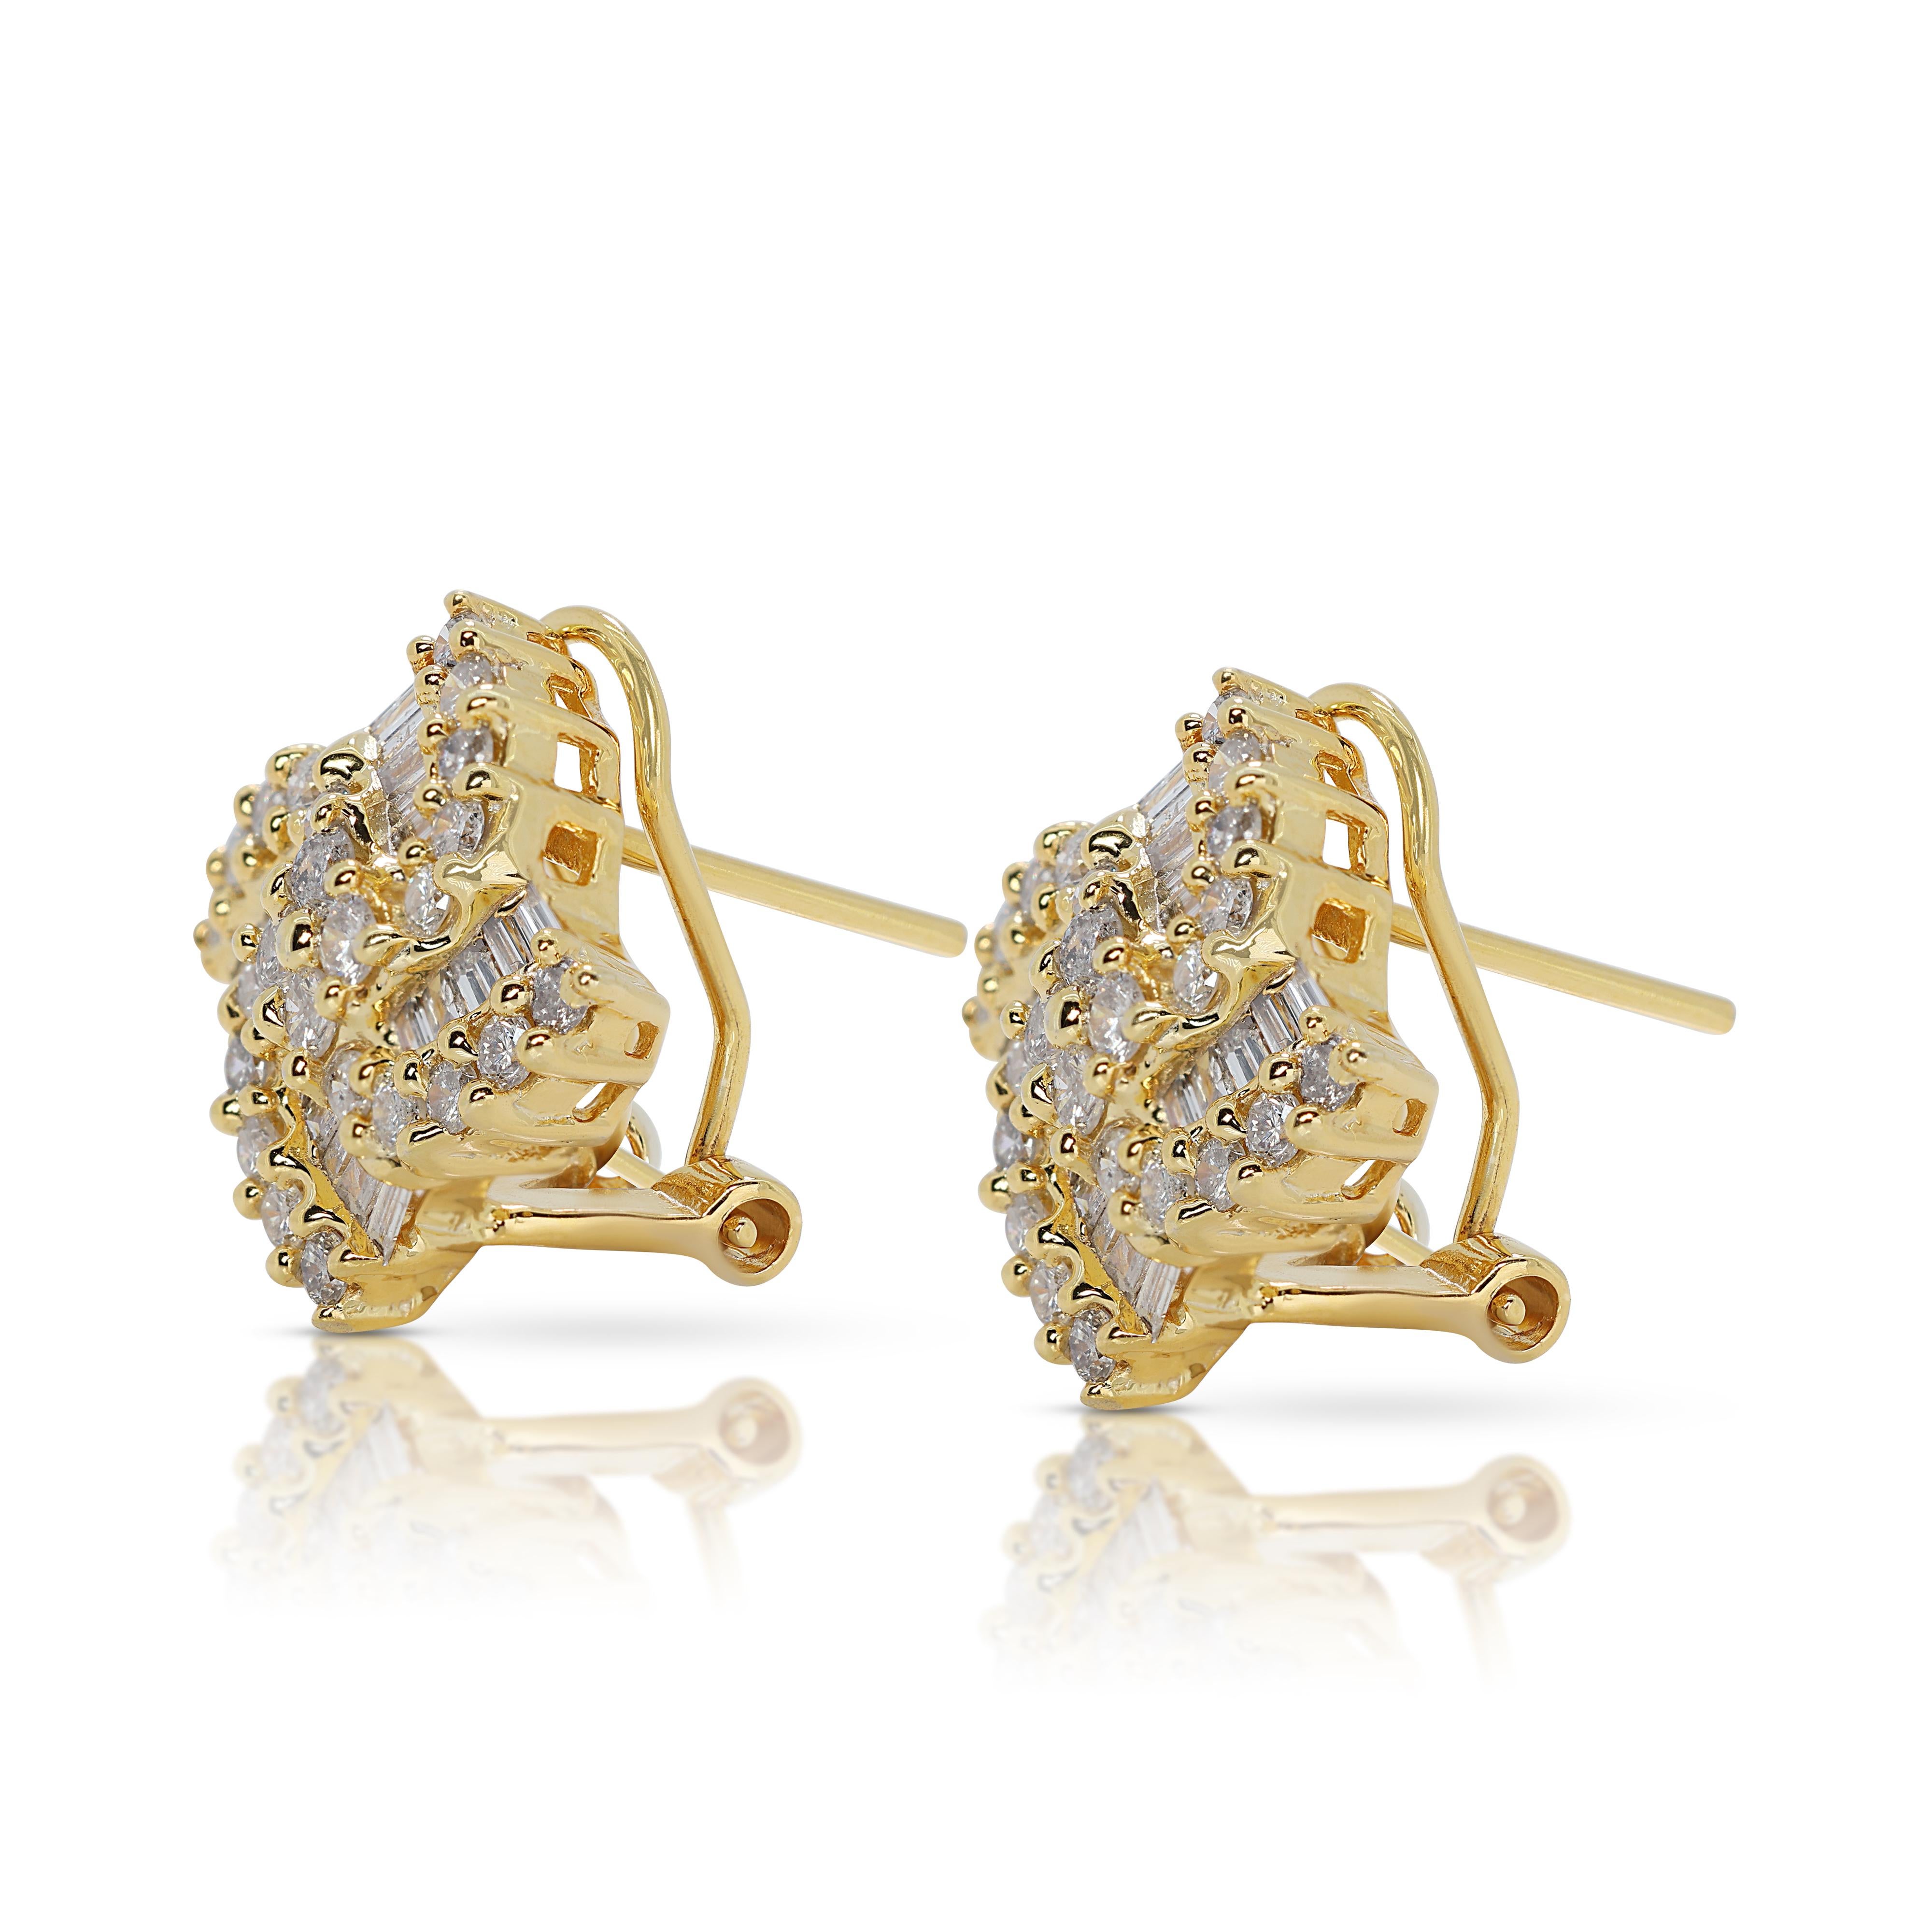 Elegant 0.84ct Diamonds Earrings in 18K Yellow Gold In Excellent Condition For Sale In רמת גן, IL